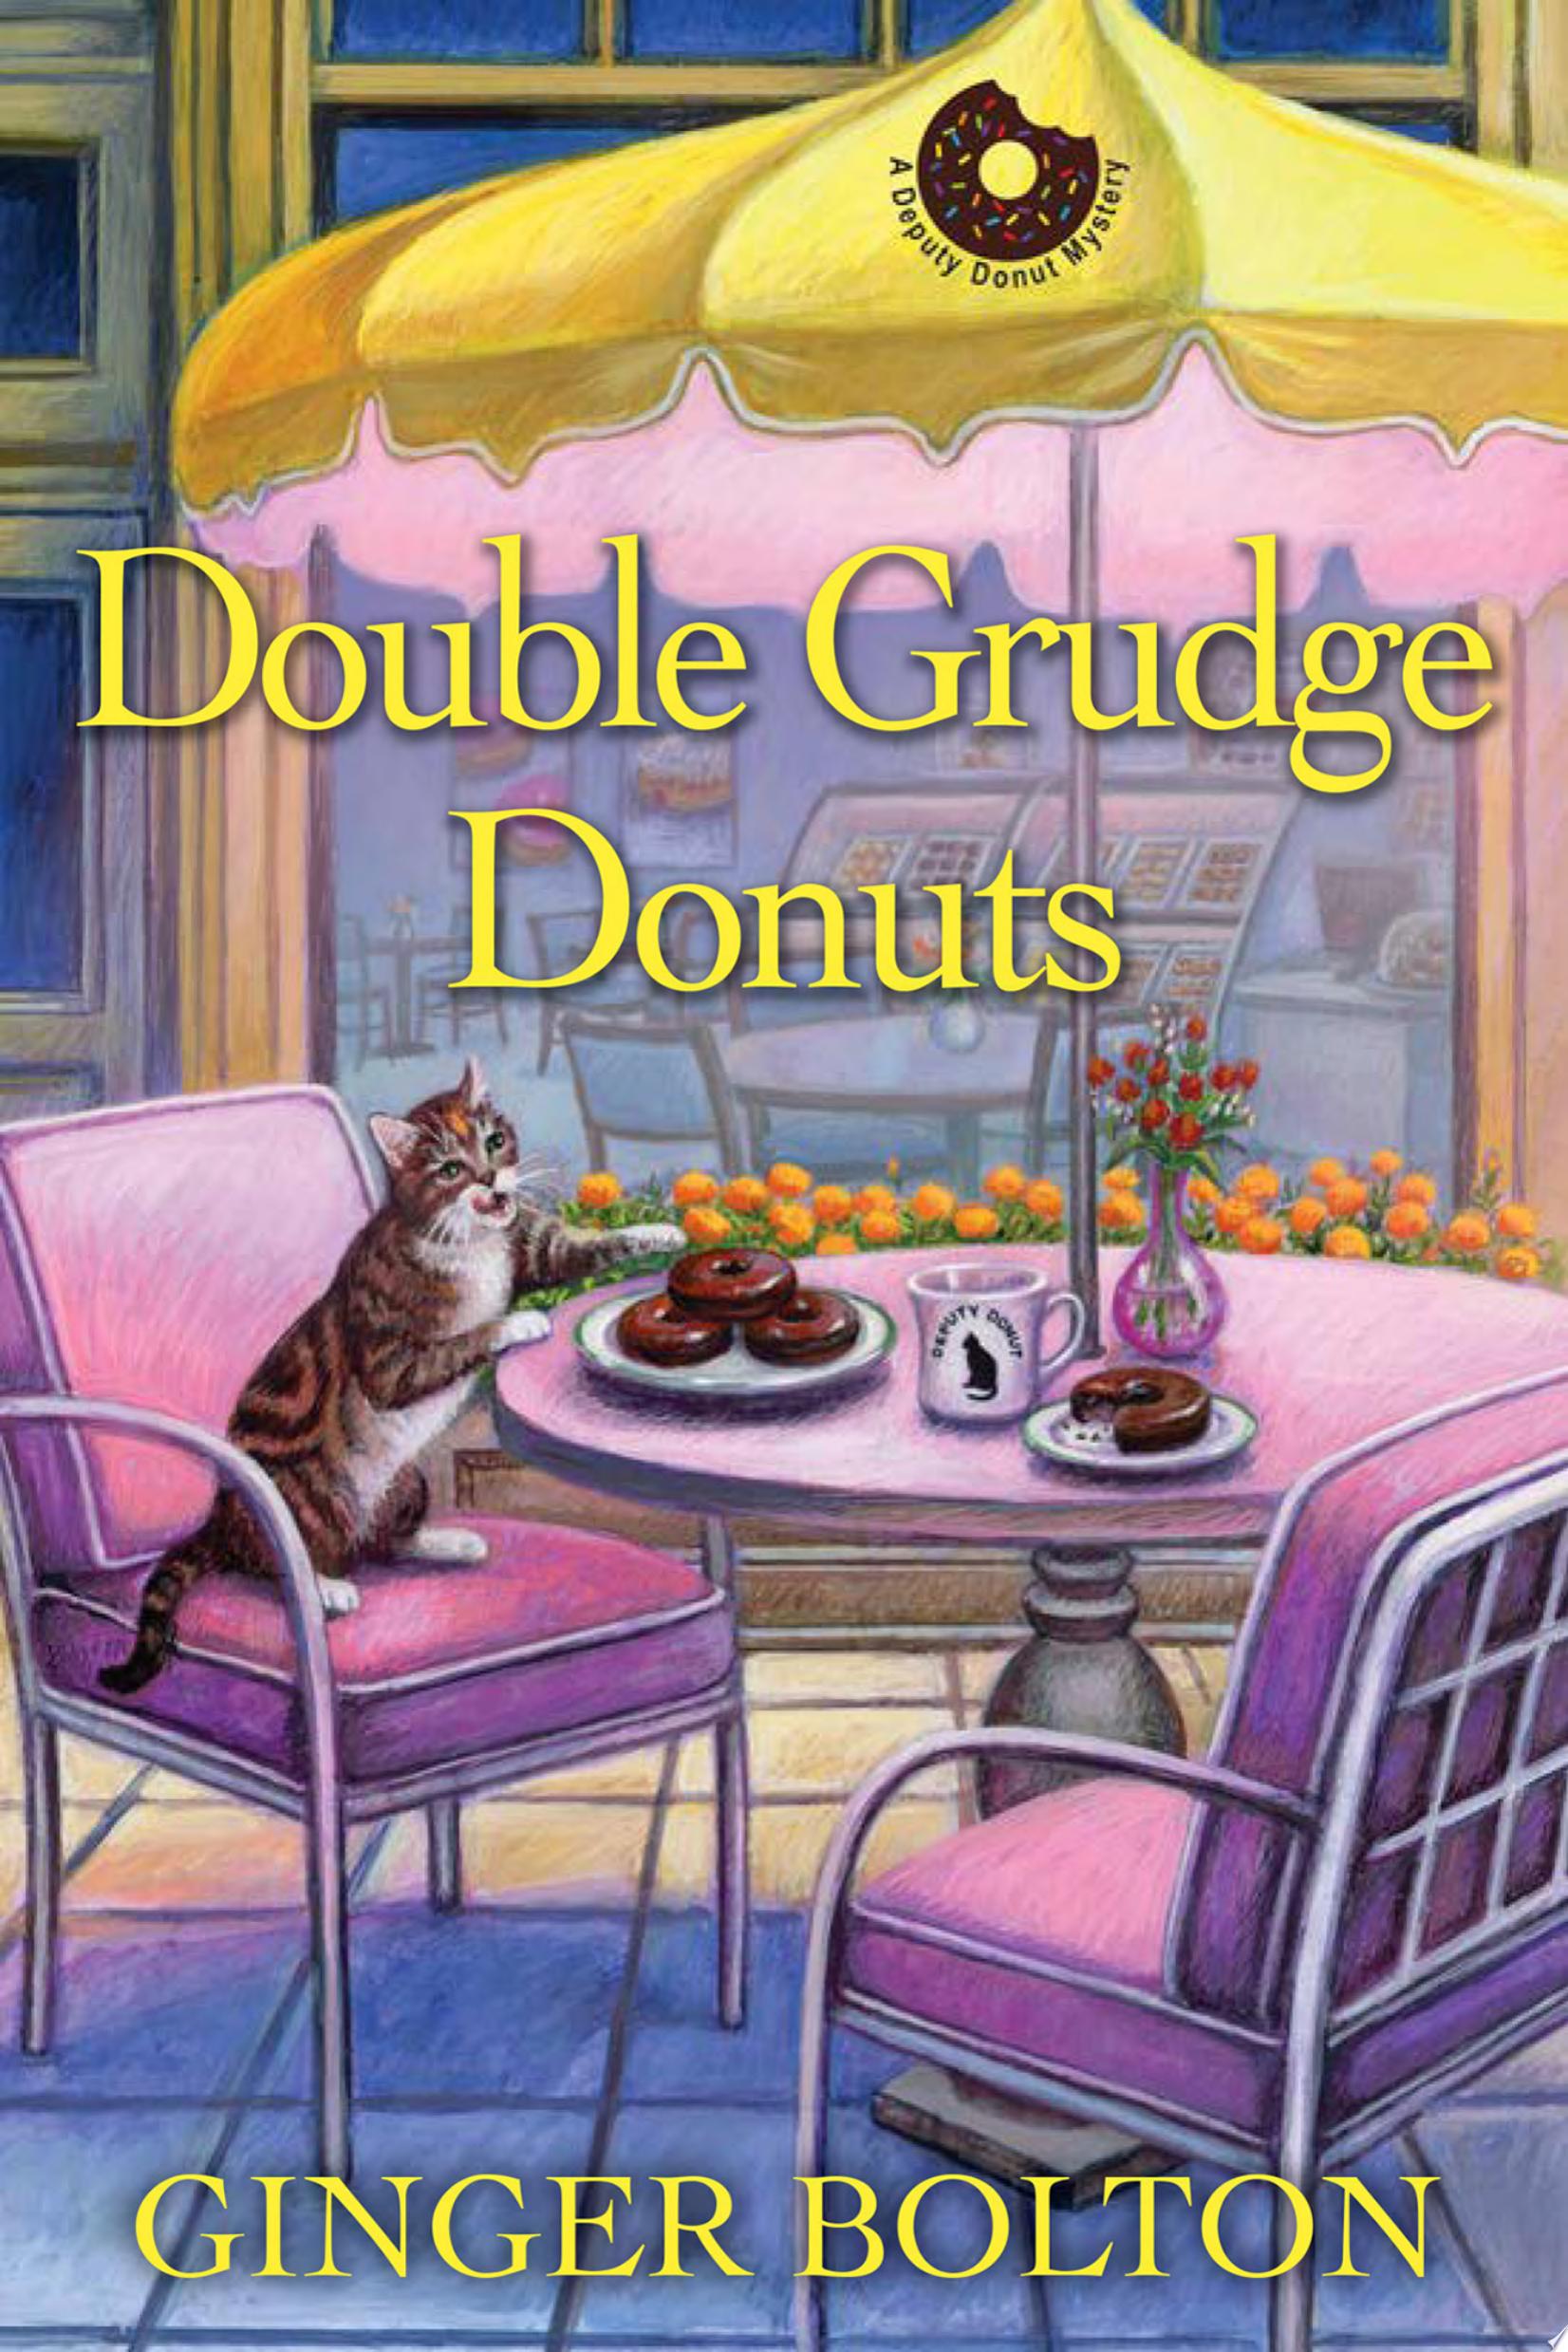 Image for "Double Grudge Donuts"